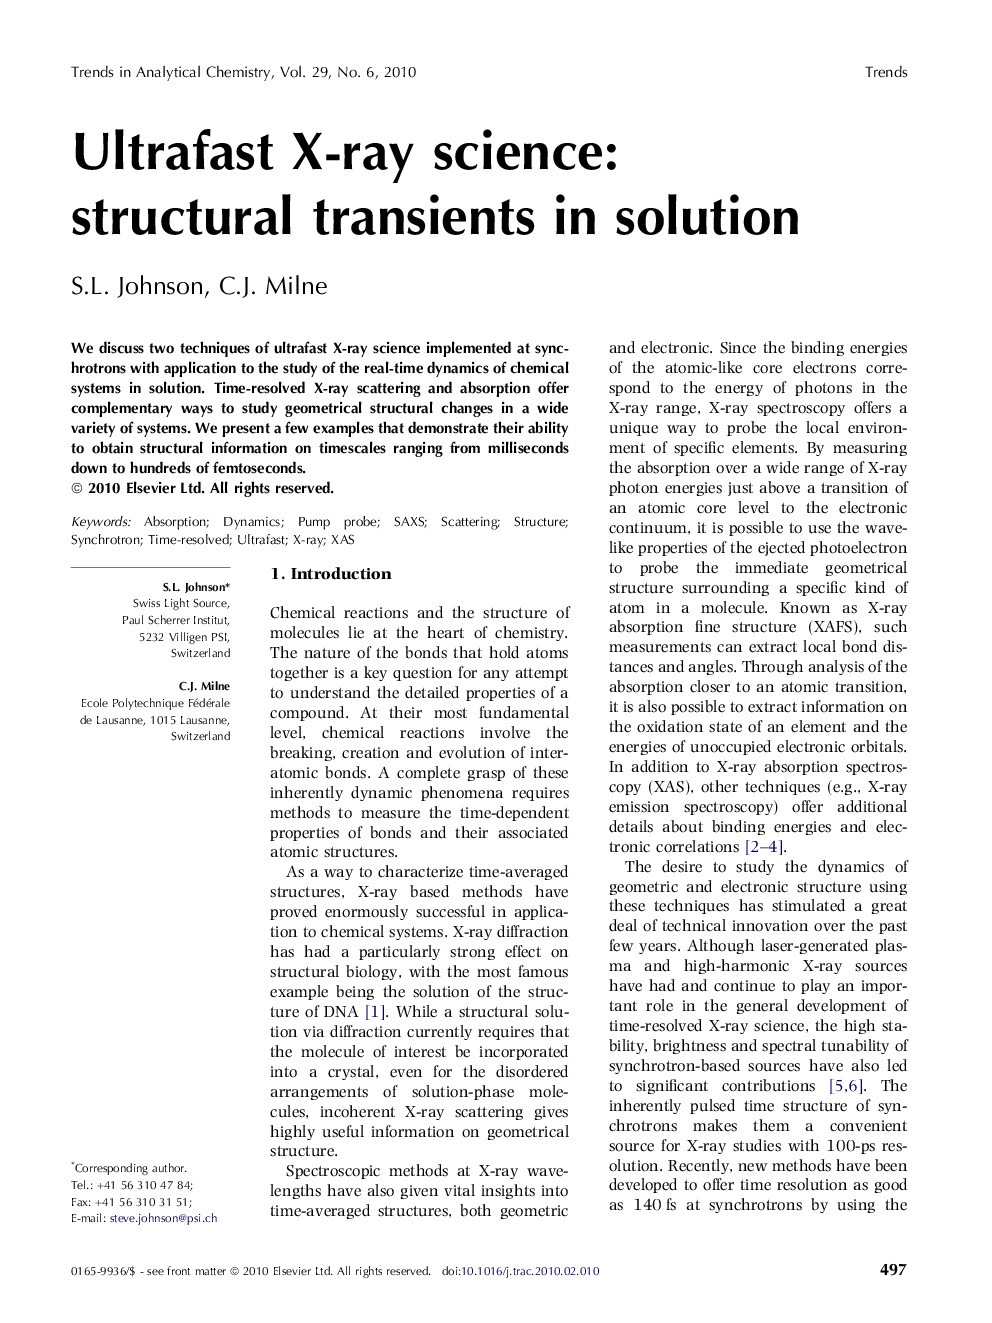 Ultrafast X-ray science: structural transients in solution